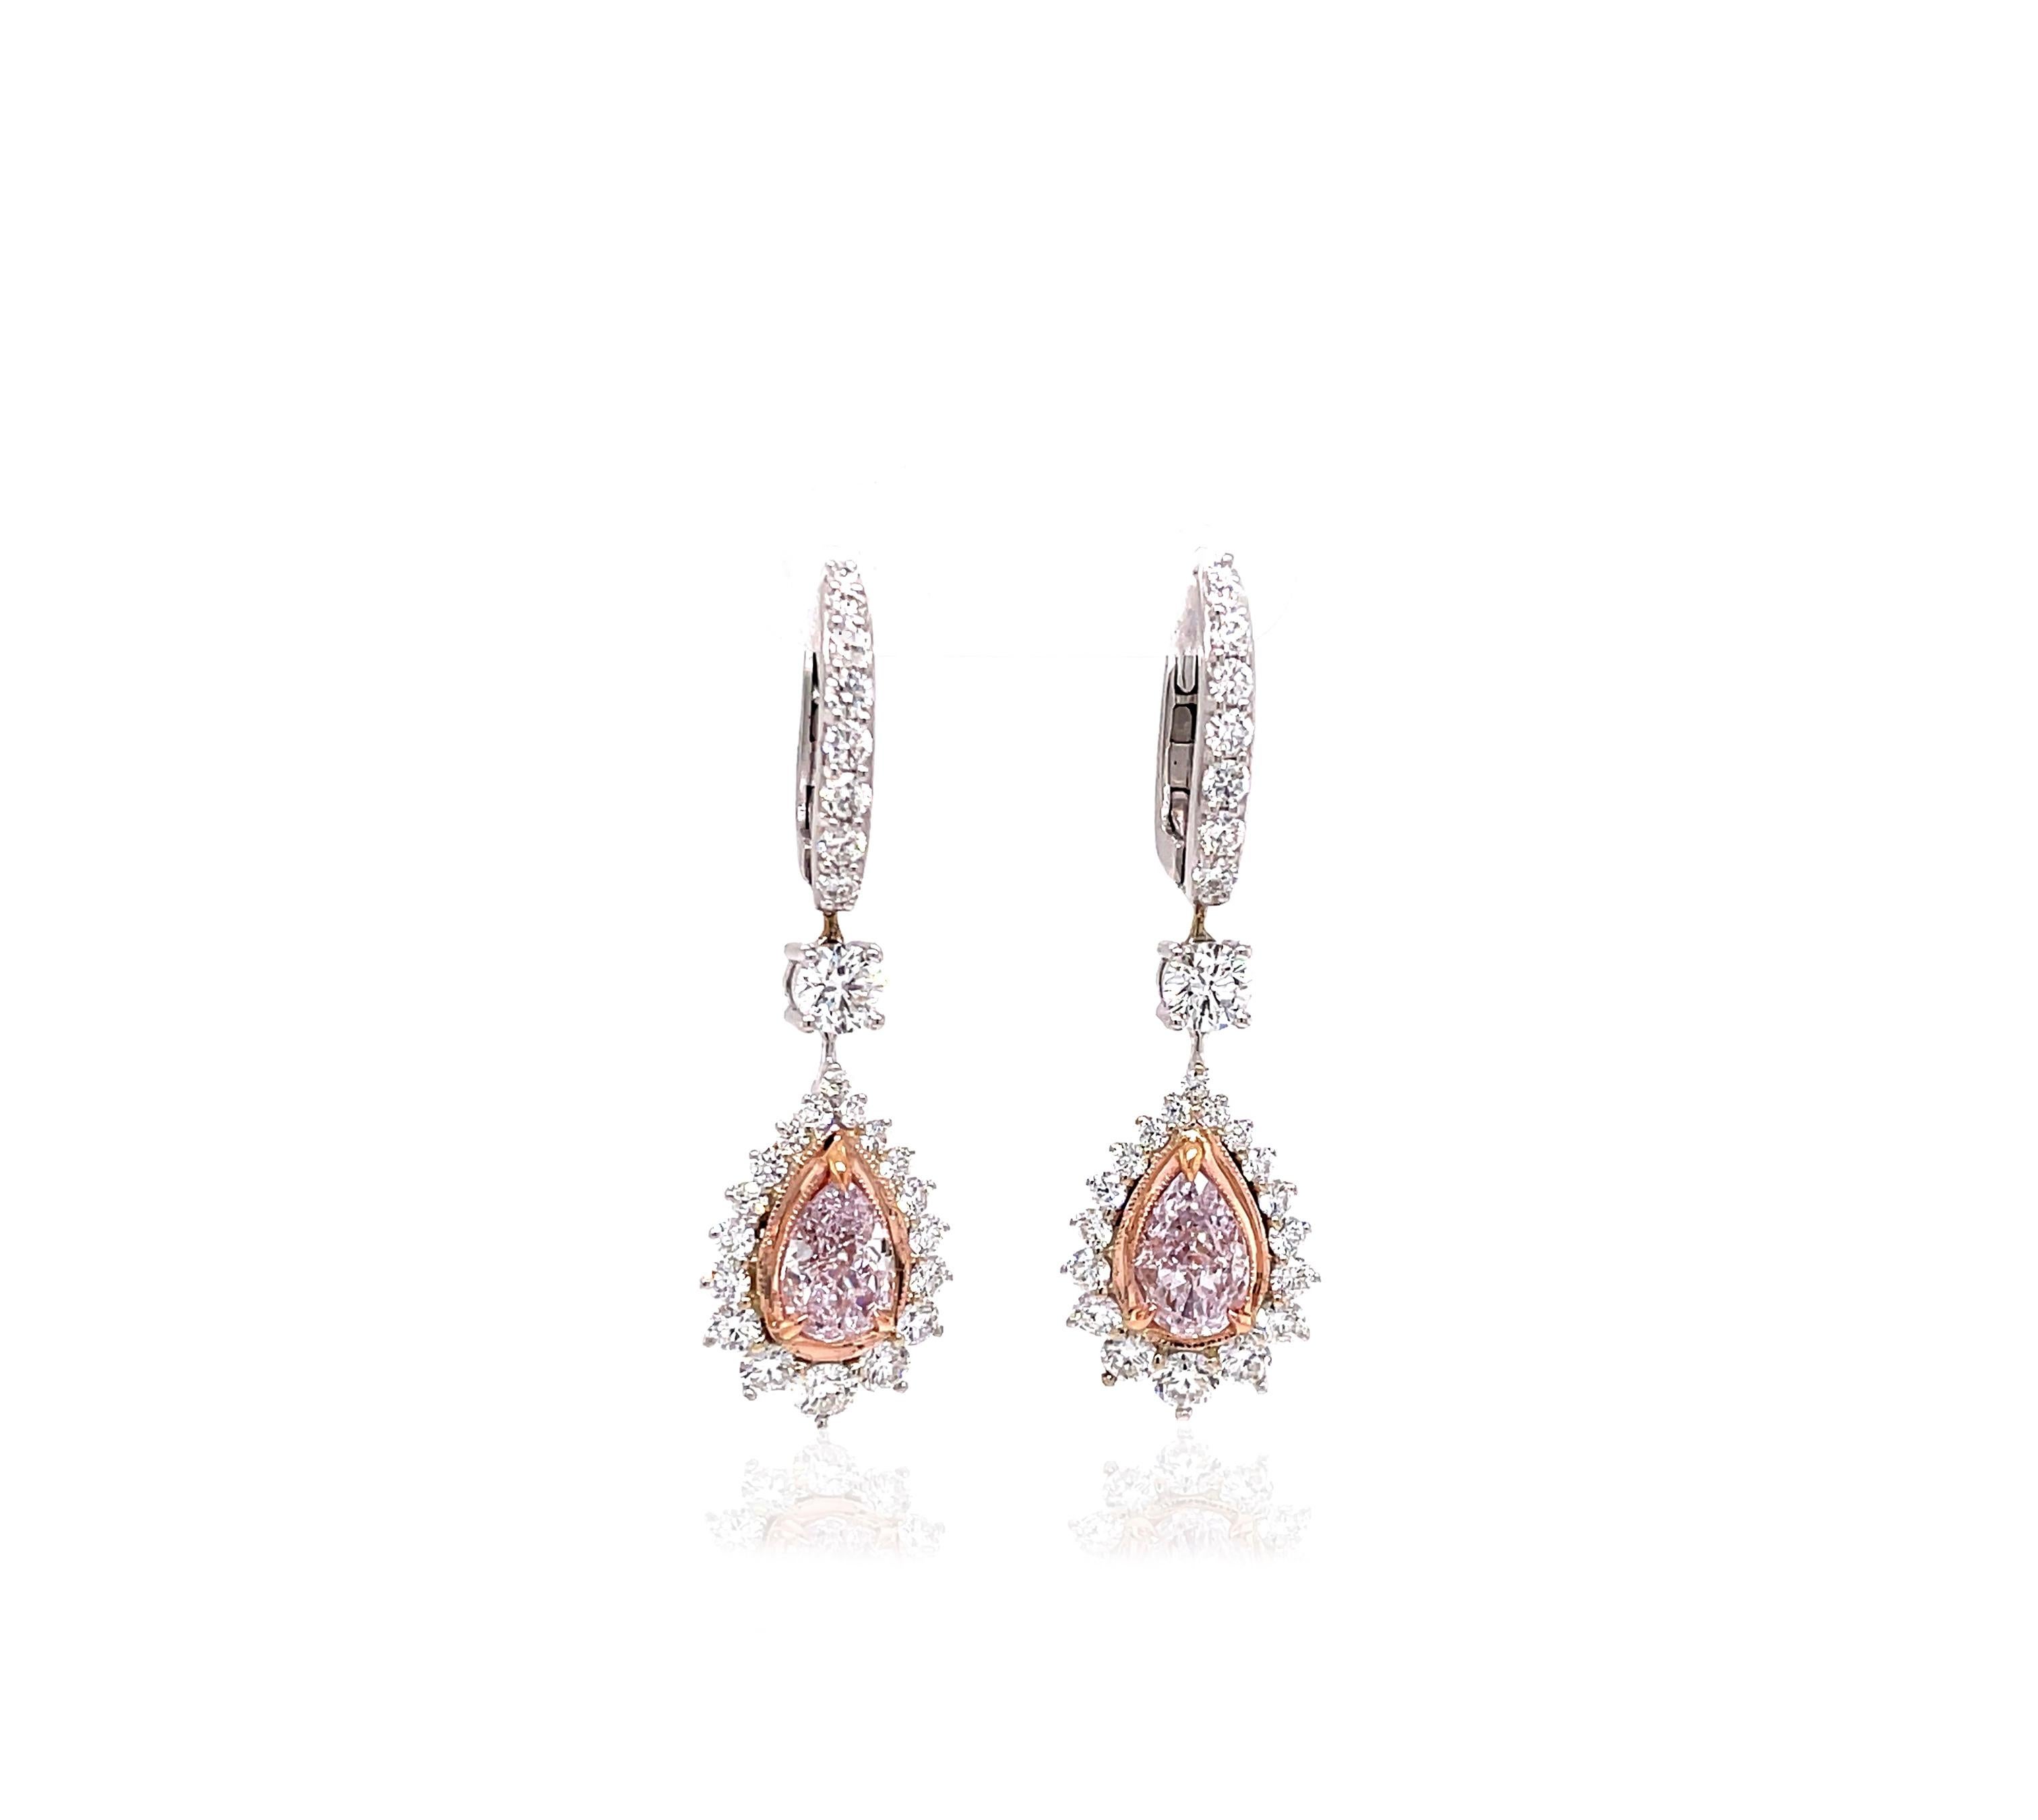 Novel Collection showcasing an exquisite set of Victorian Style Drop Diamond Earrings, highlighting a central duo of impeccably matched pear-cut, Light Pink diamonds with a combined weight of 2 Carats. These pink diamonds have been GIA certified as